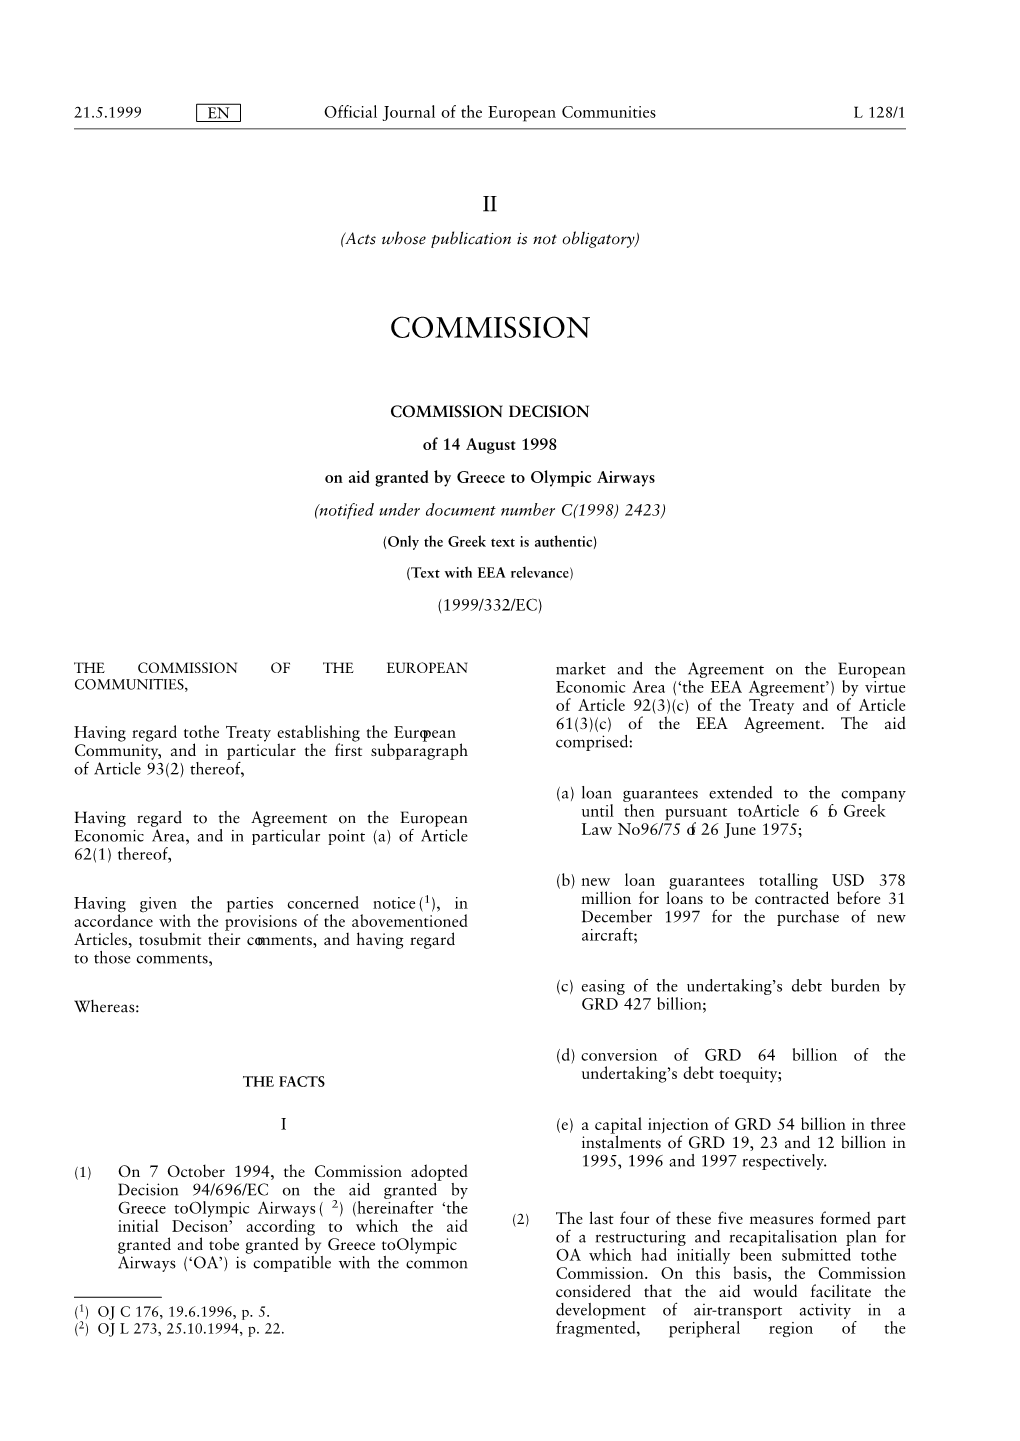 Commission Decision of 14 August 1998 On